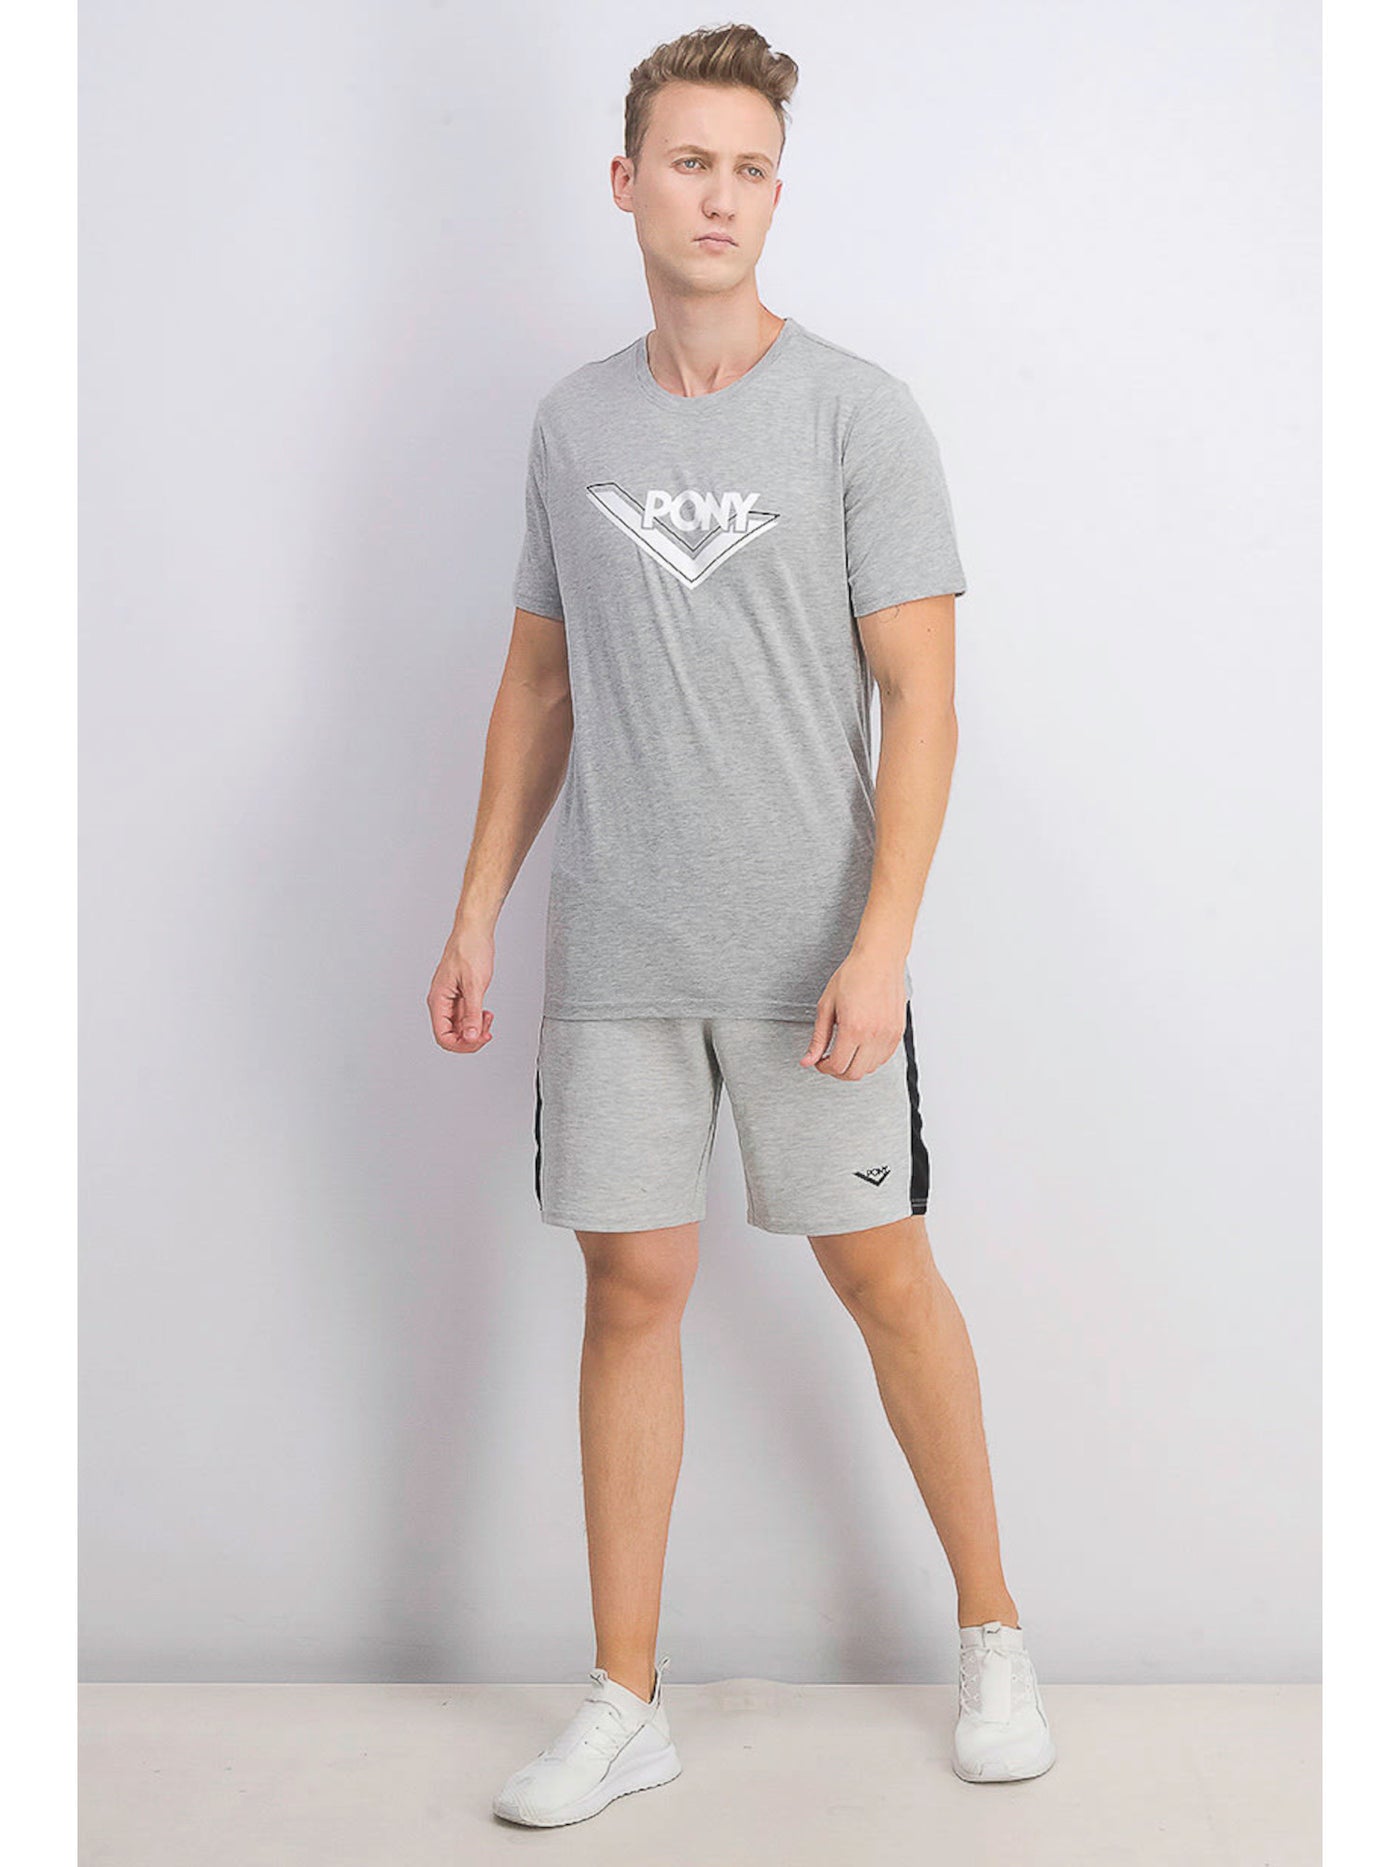 PONY Mens Gray Graphic Short Sleeve Classic Fit T-Shirt M